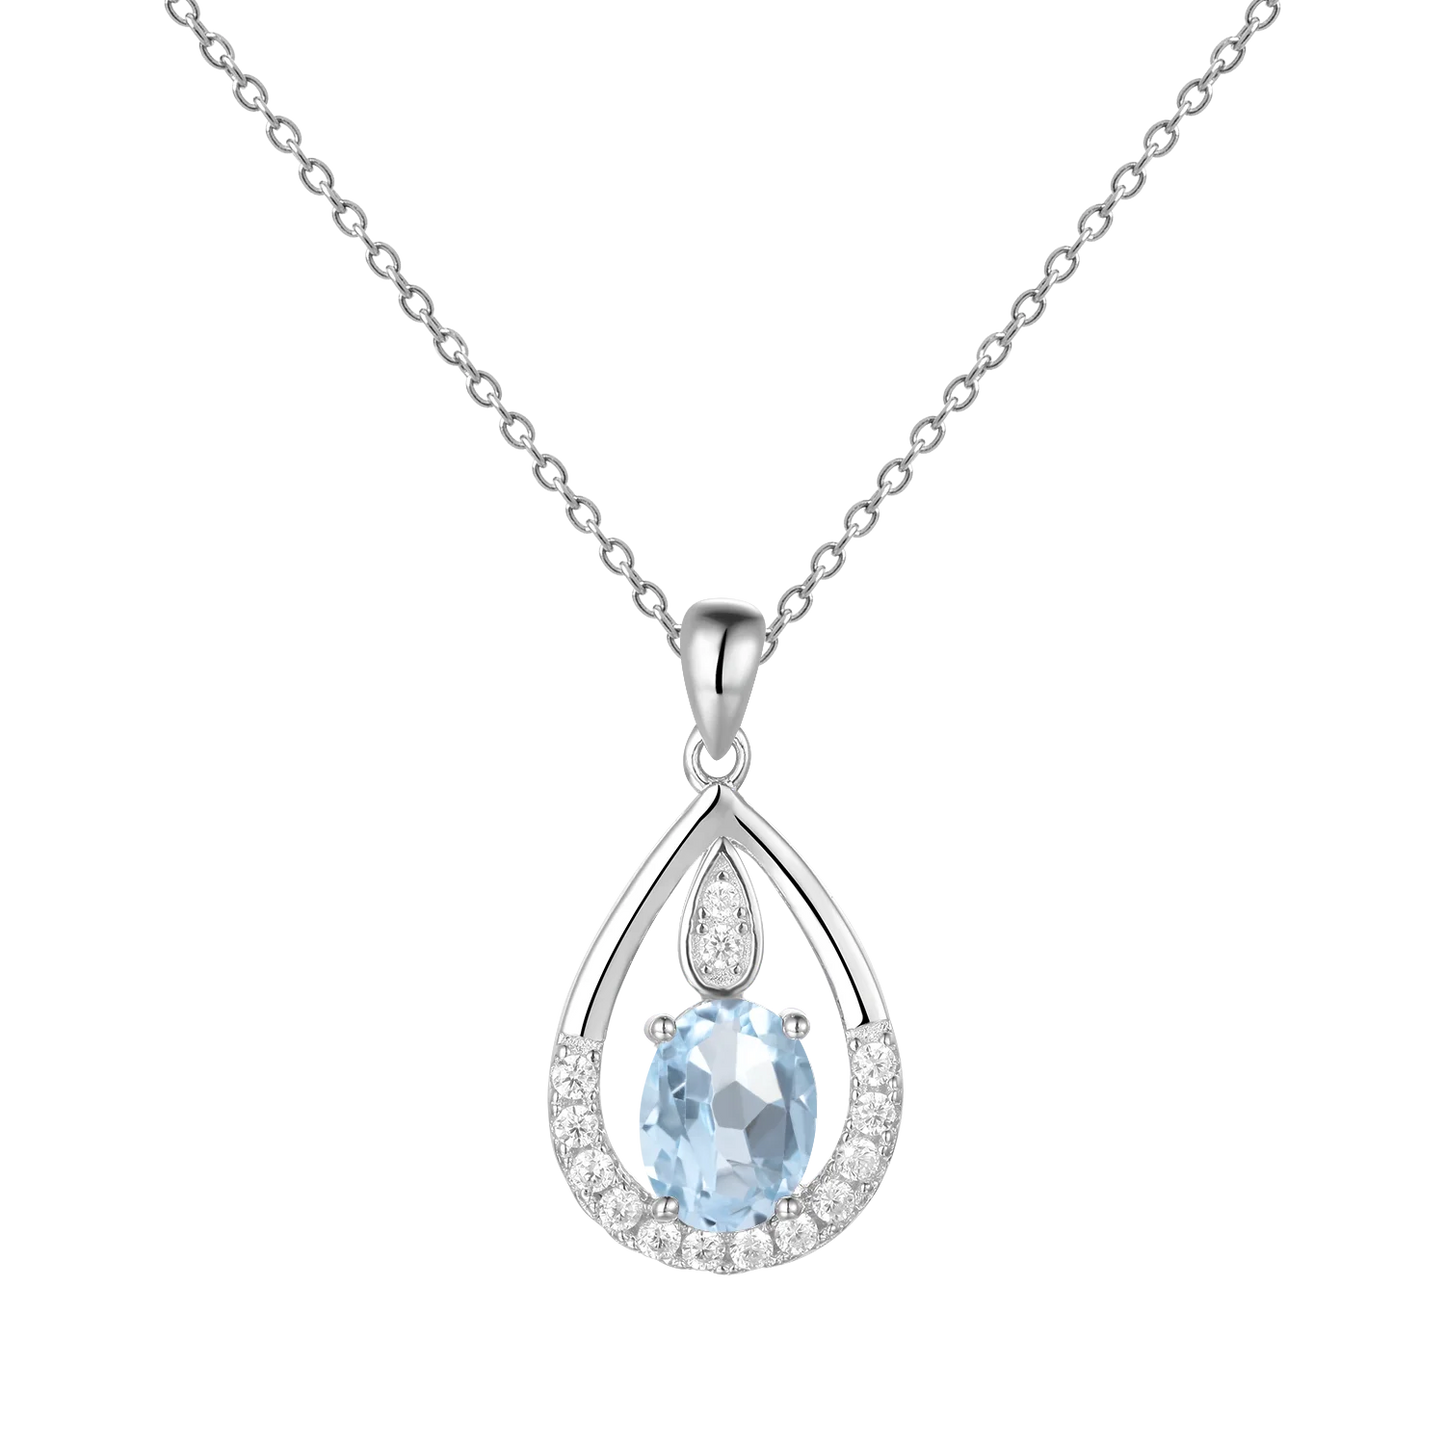 Gem's Ballet December Birthstone Topaz Necklace 6x8mm Oval Pink Topaz Pendant Necklace in 925 Sterling Silver with 18" Chain Sky Blue Topaz